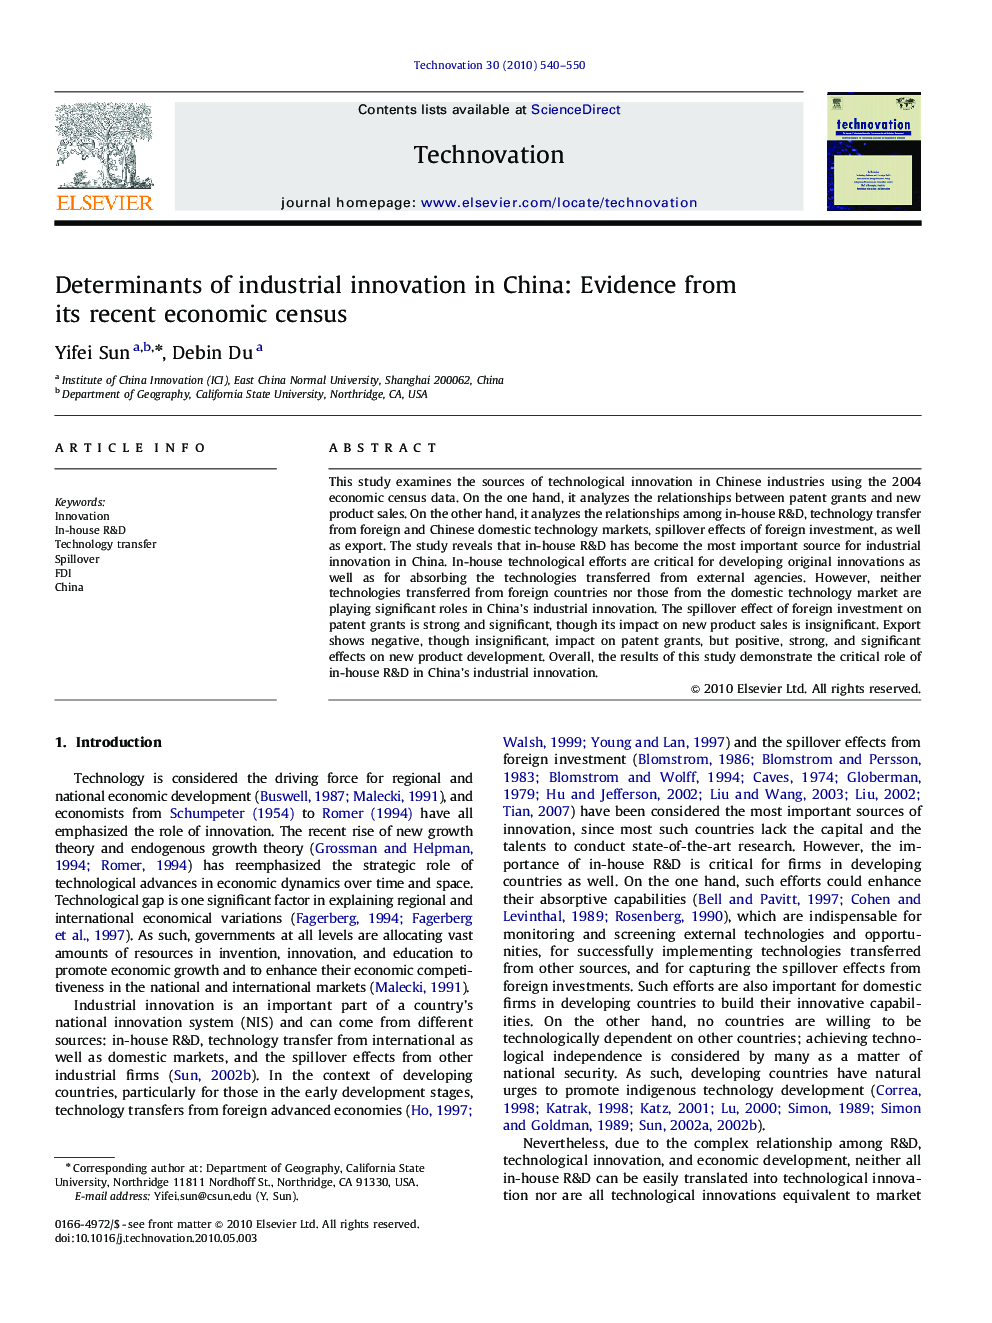 Determinants of industrial innovation in China: Evidence from its recent economic census